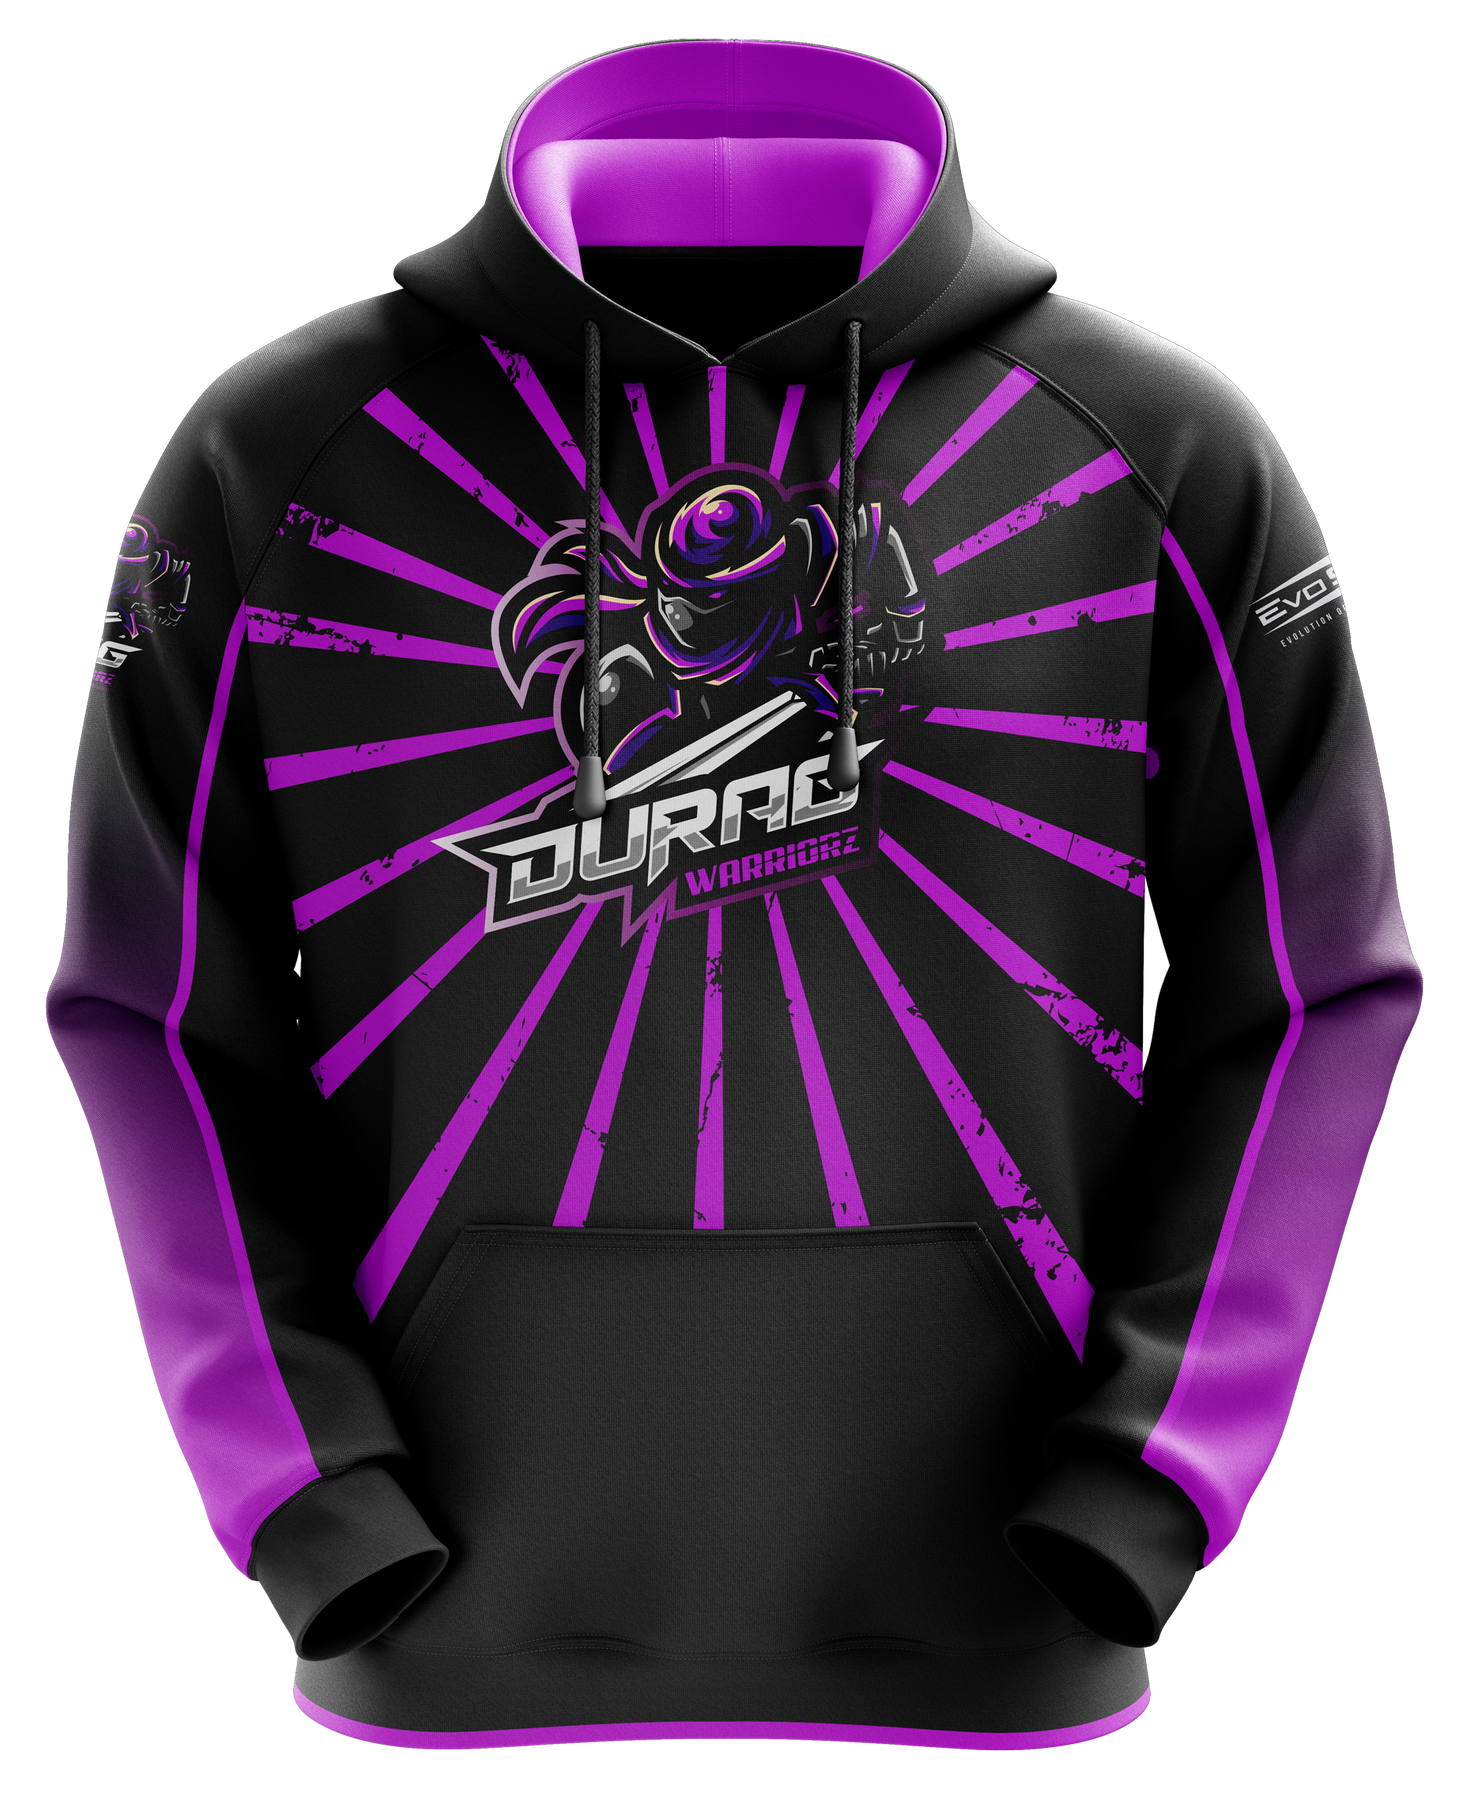 design an esports jersey, hoodie and jacket package